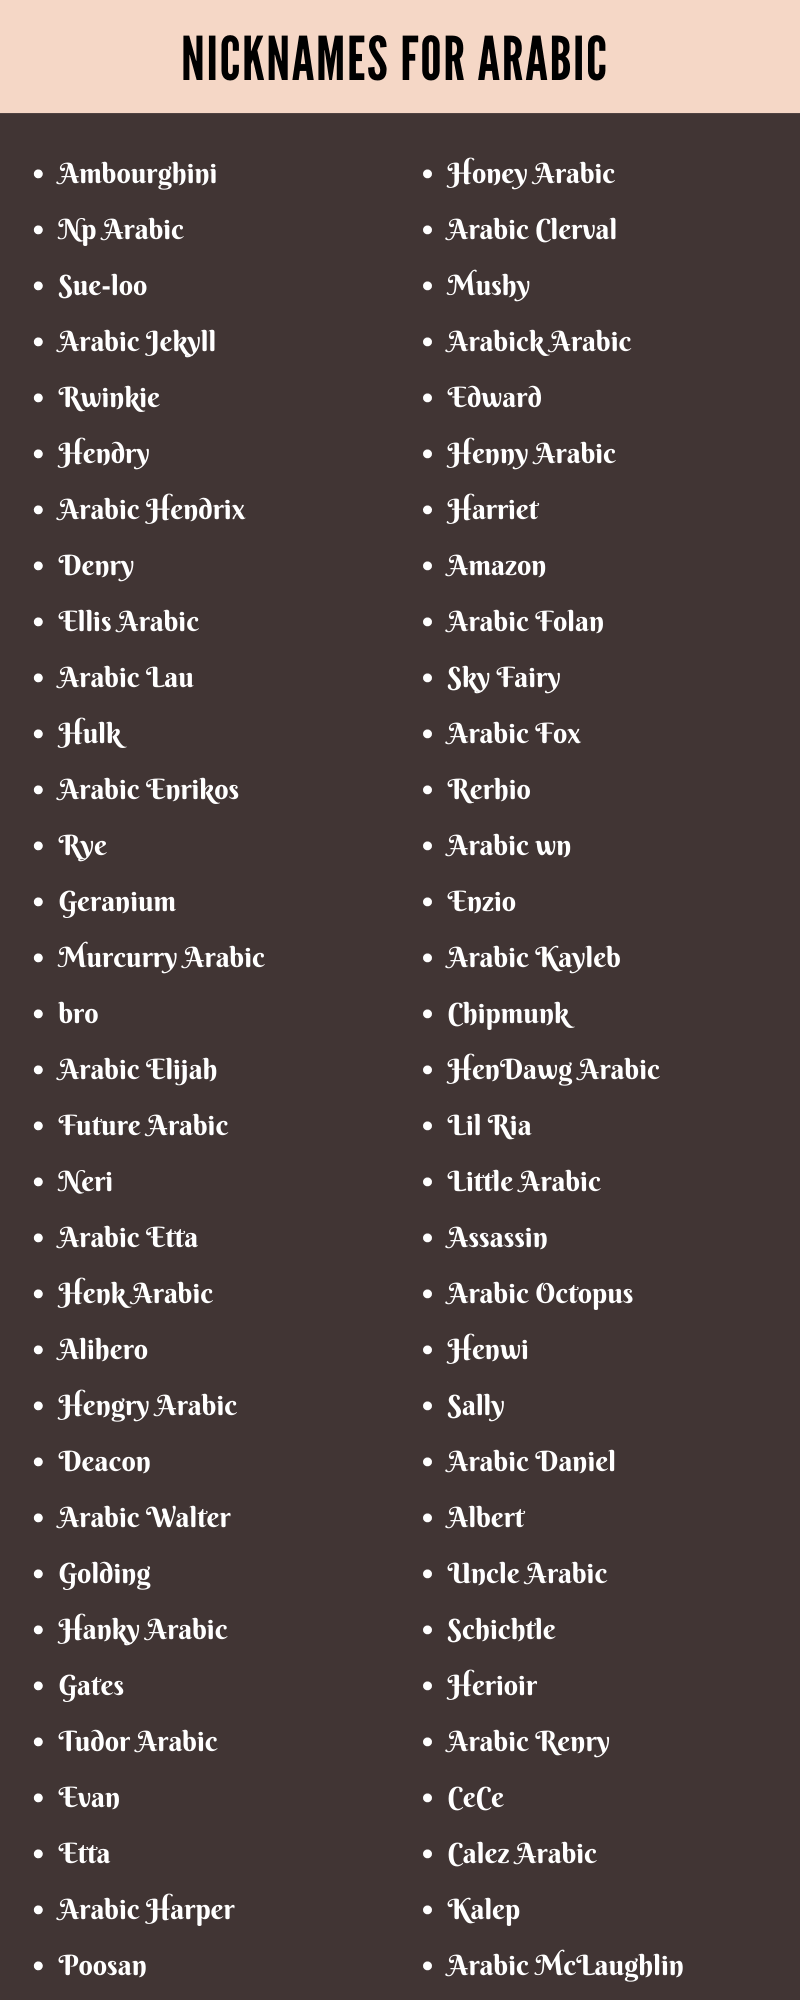 Arabic Nicknames: 200 Best and Amazing Names